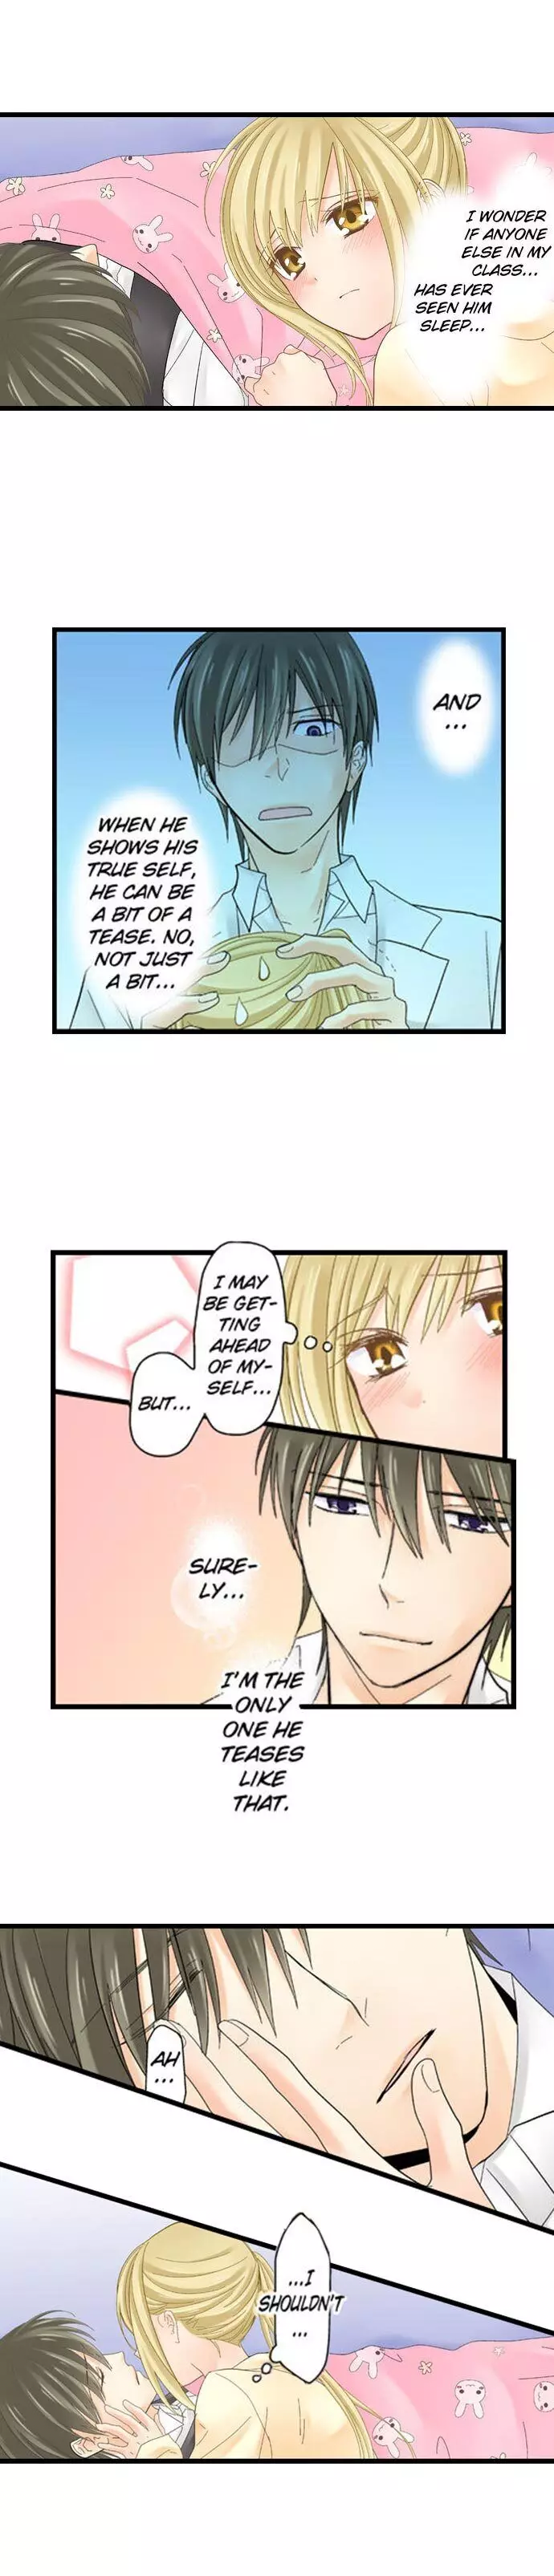 Running A Love Hotel With My Math Teacher - 13 page 8